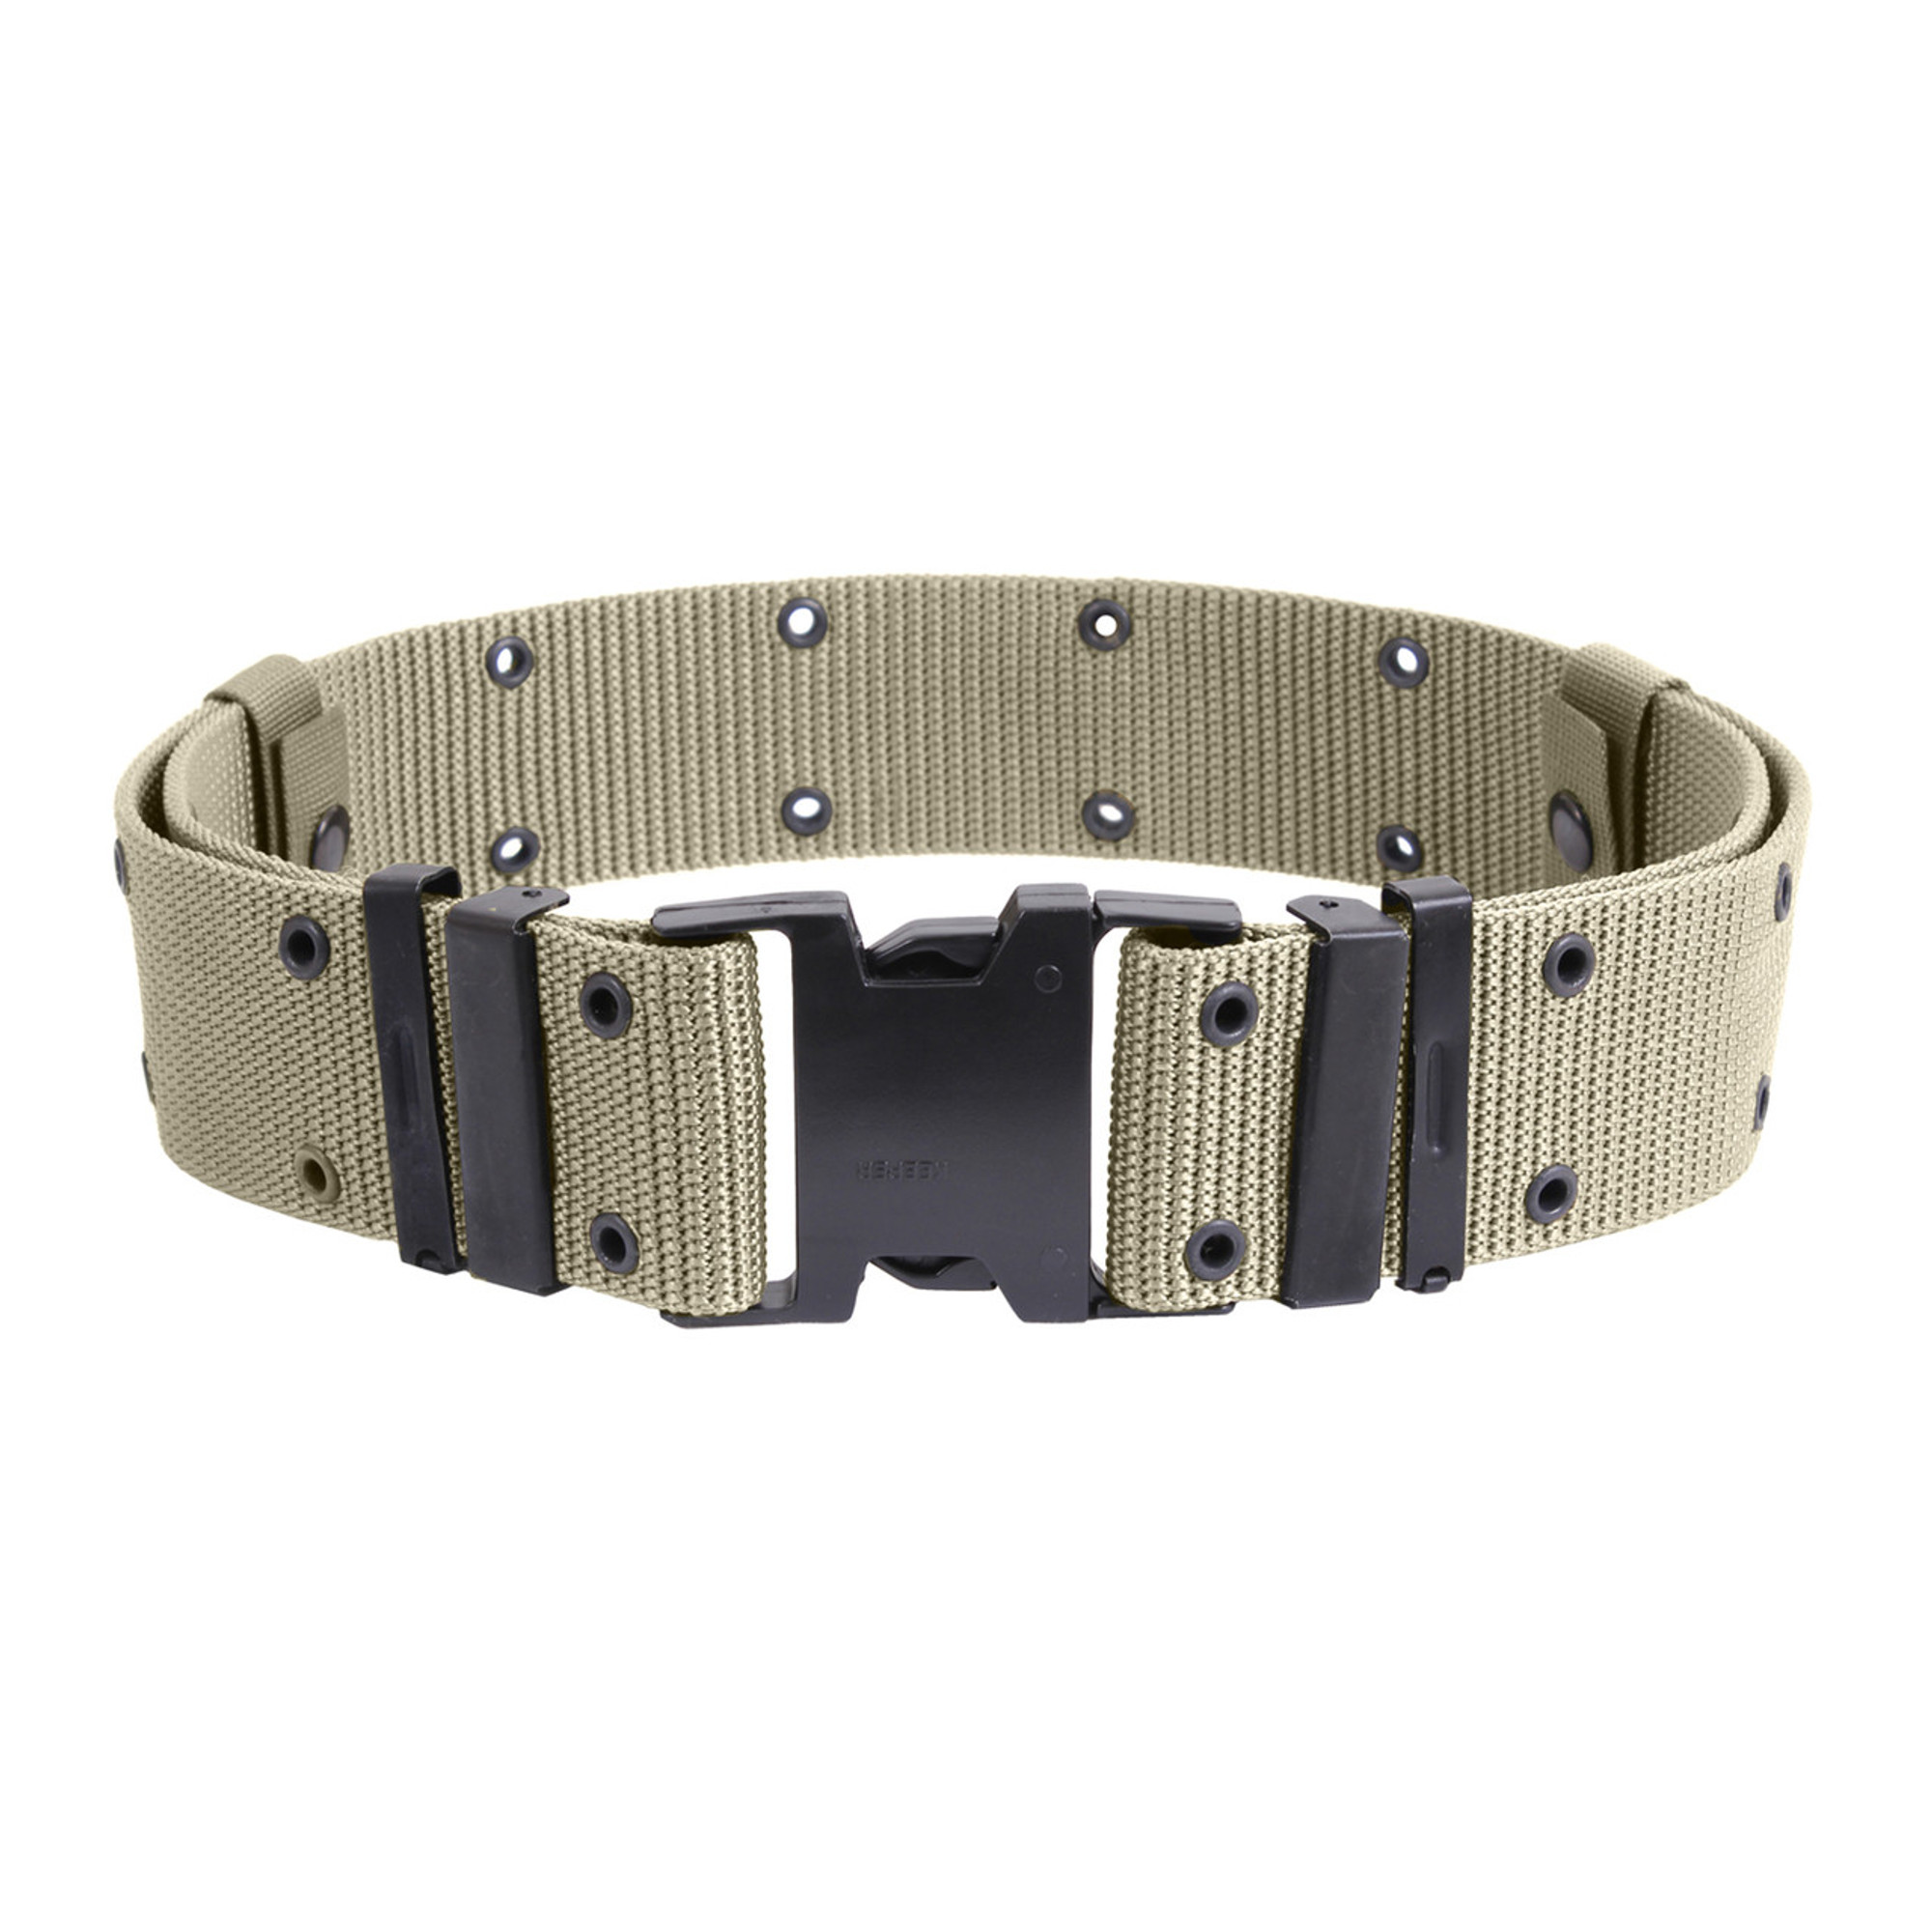 Rothco New Issue Marine Corps Style Quick Release Pistol Belts - Khaki